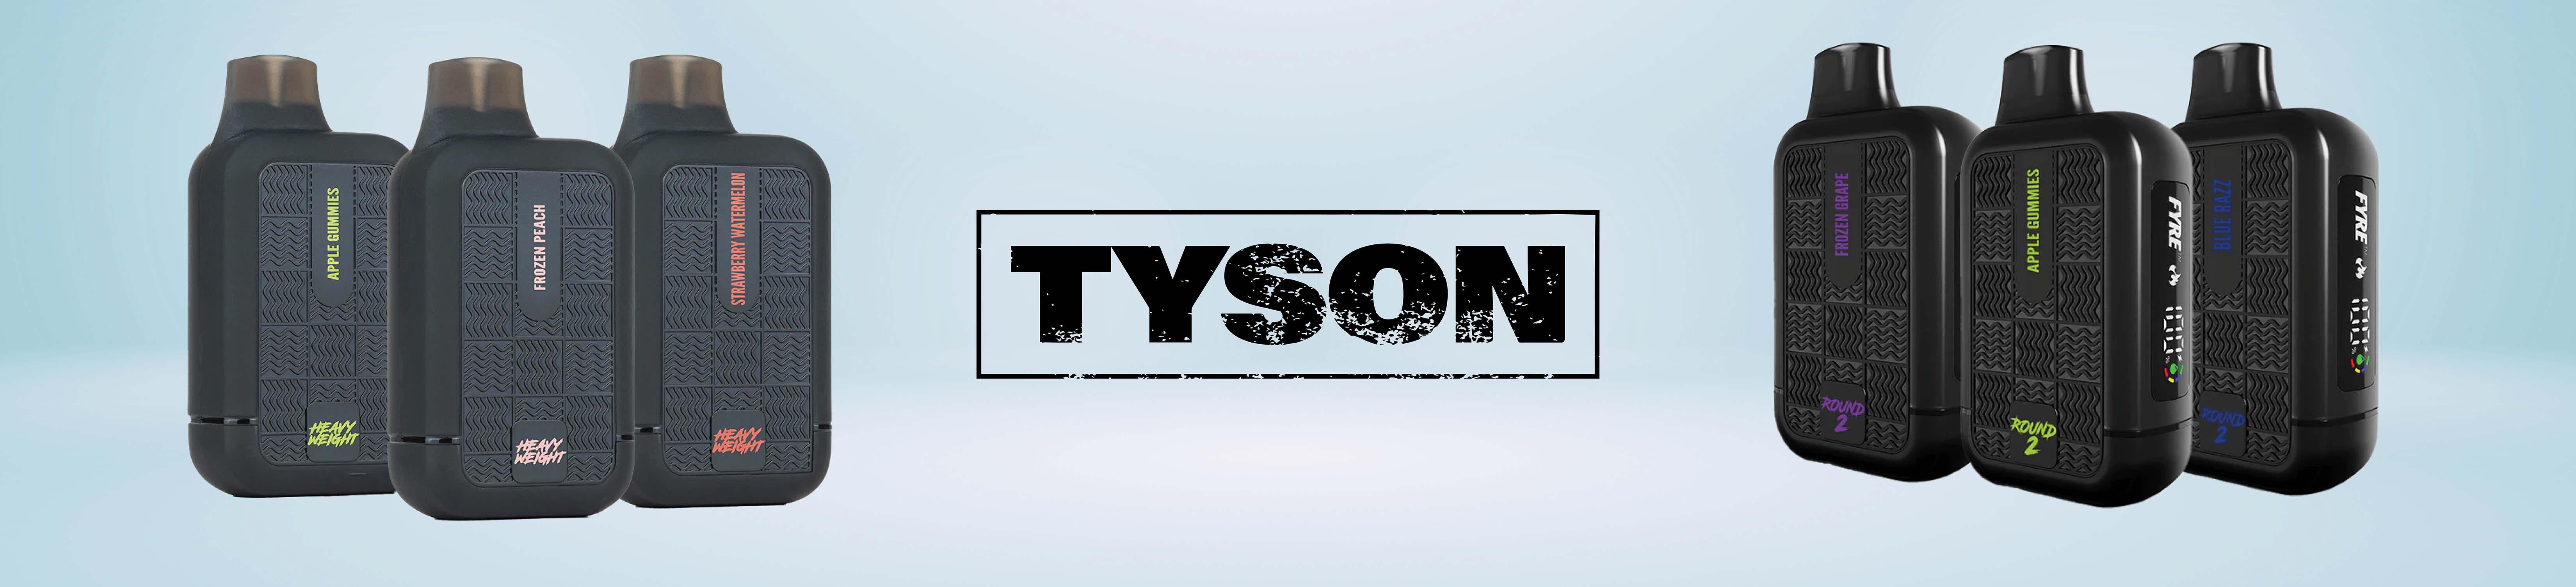 Tyson 2.0 Collection Banner